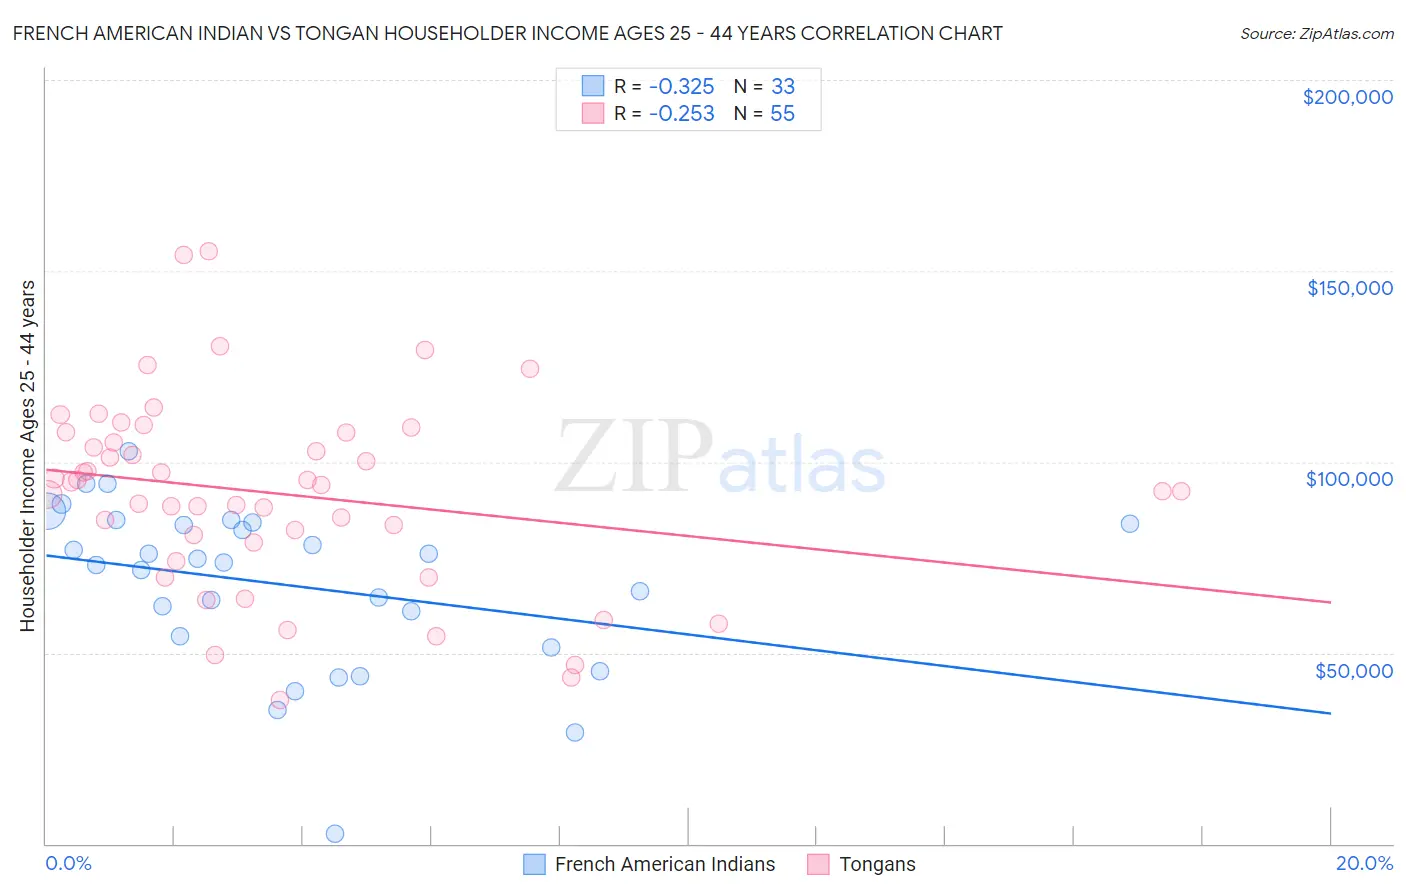 French American Indian vs Tongan Householder Income Ages 25 - 44 years